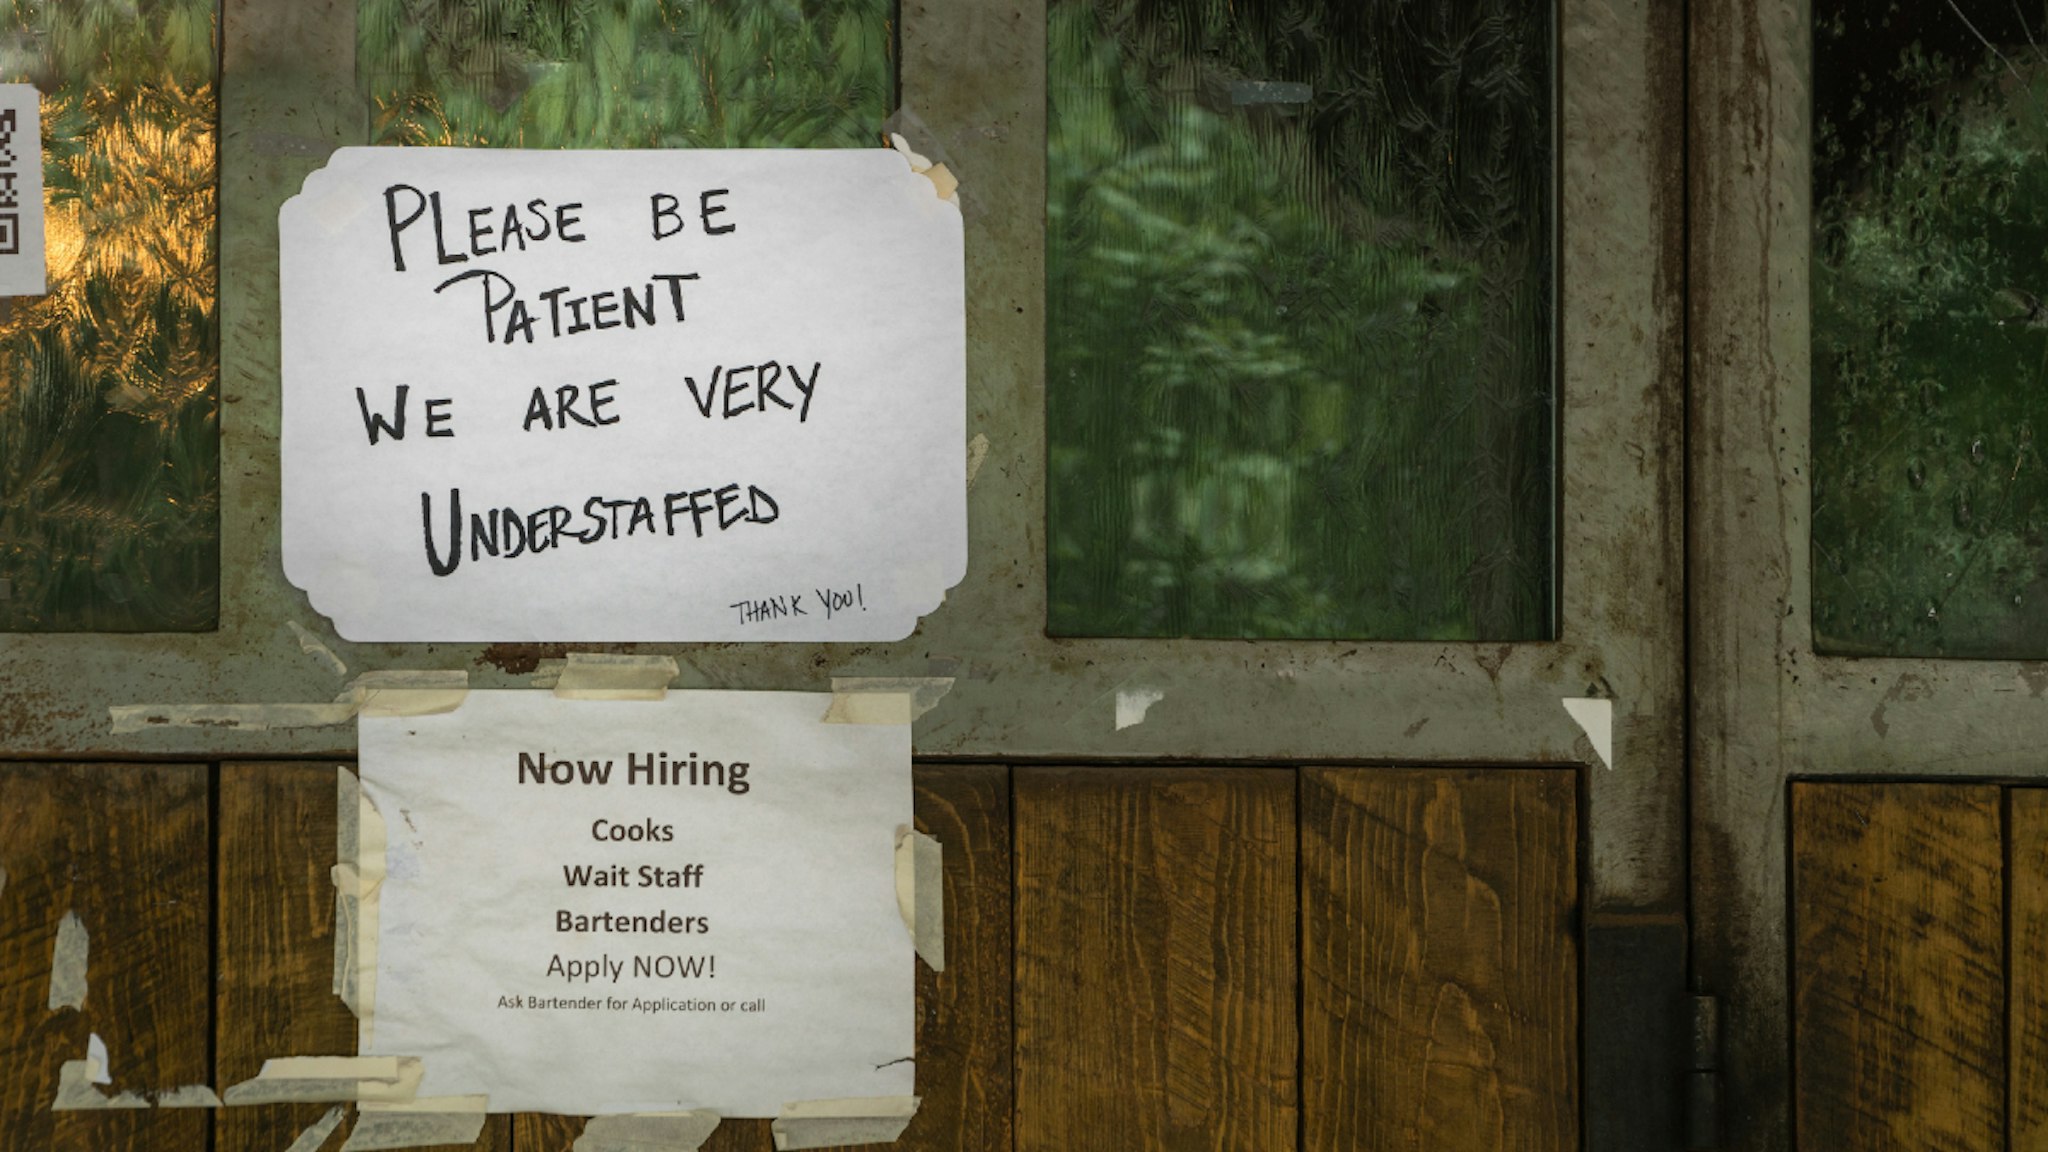 Rustic sign in restaurant window during time of Covid stating restaurant is understaffed and is hiring in a struggling economy, showing the plight of small businesses in the post-pandemic economy.